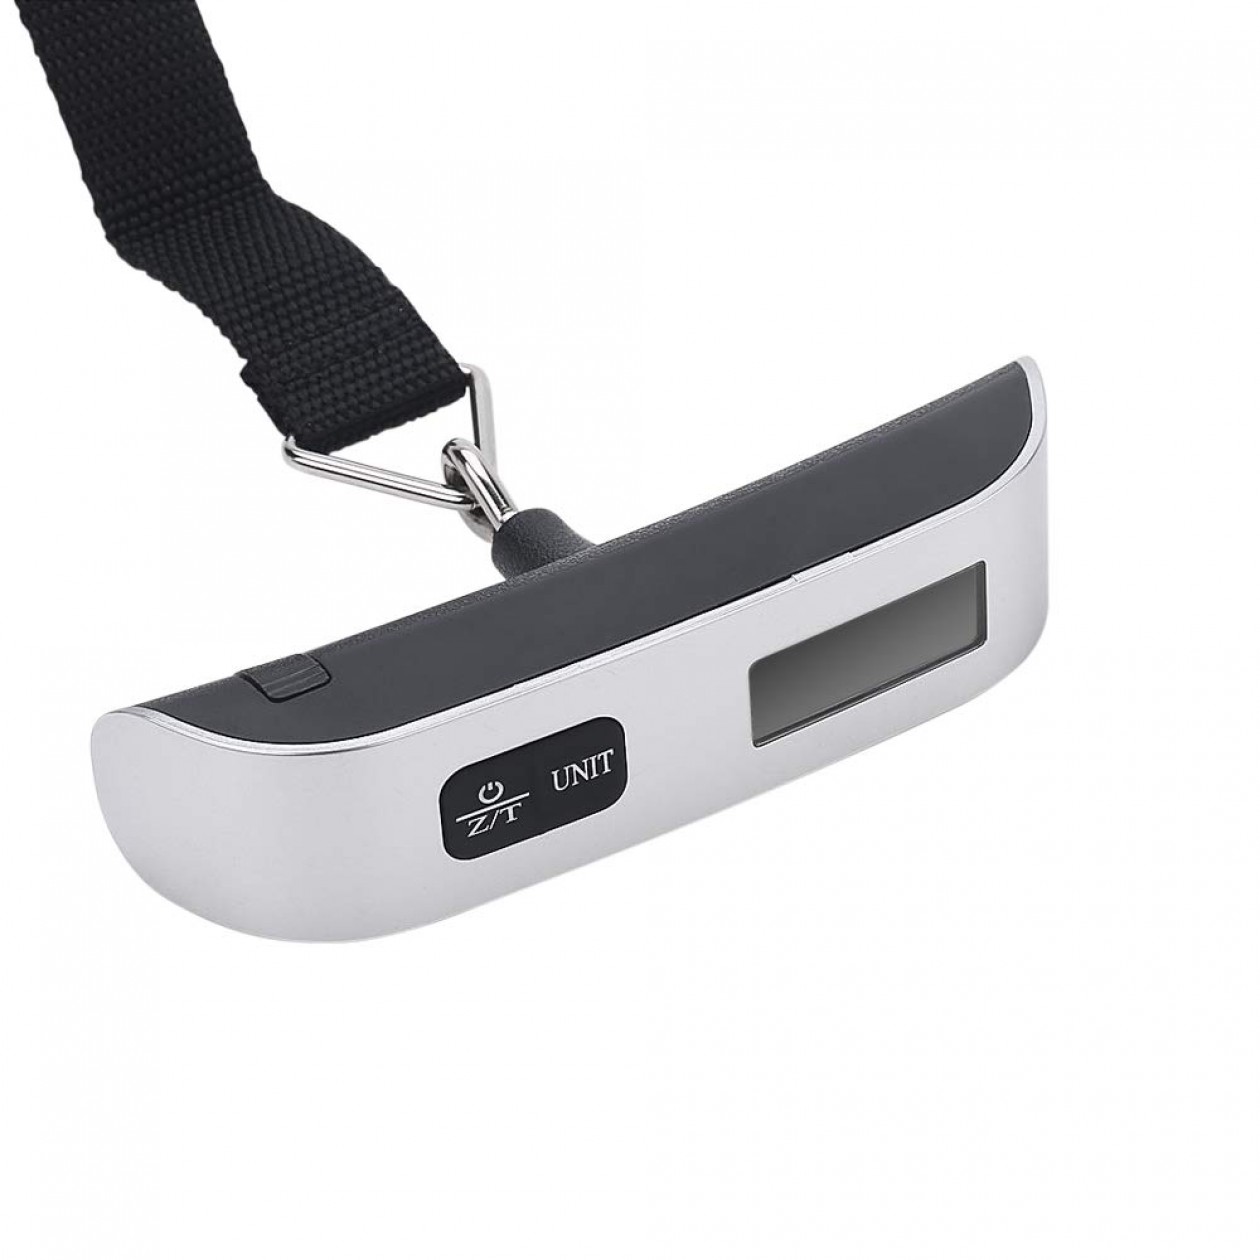 Luggage Scale 50kg Digital for Travel SuitCases Bags with Free Battery